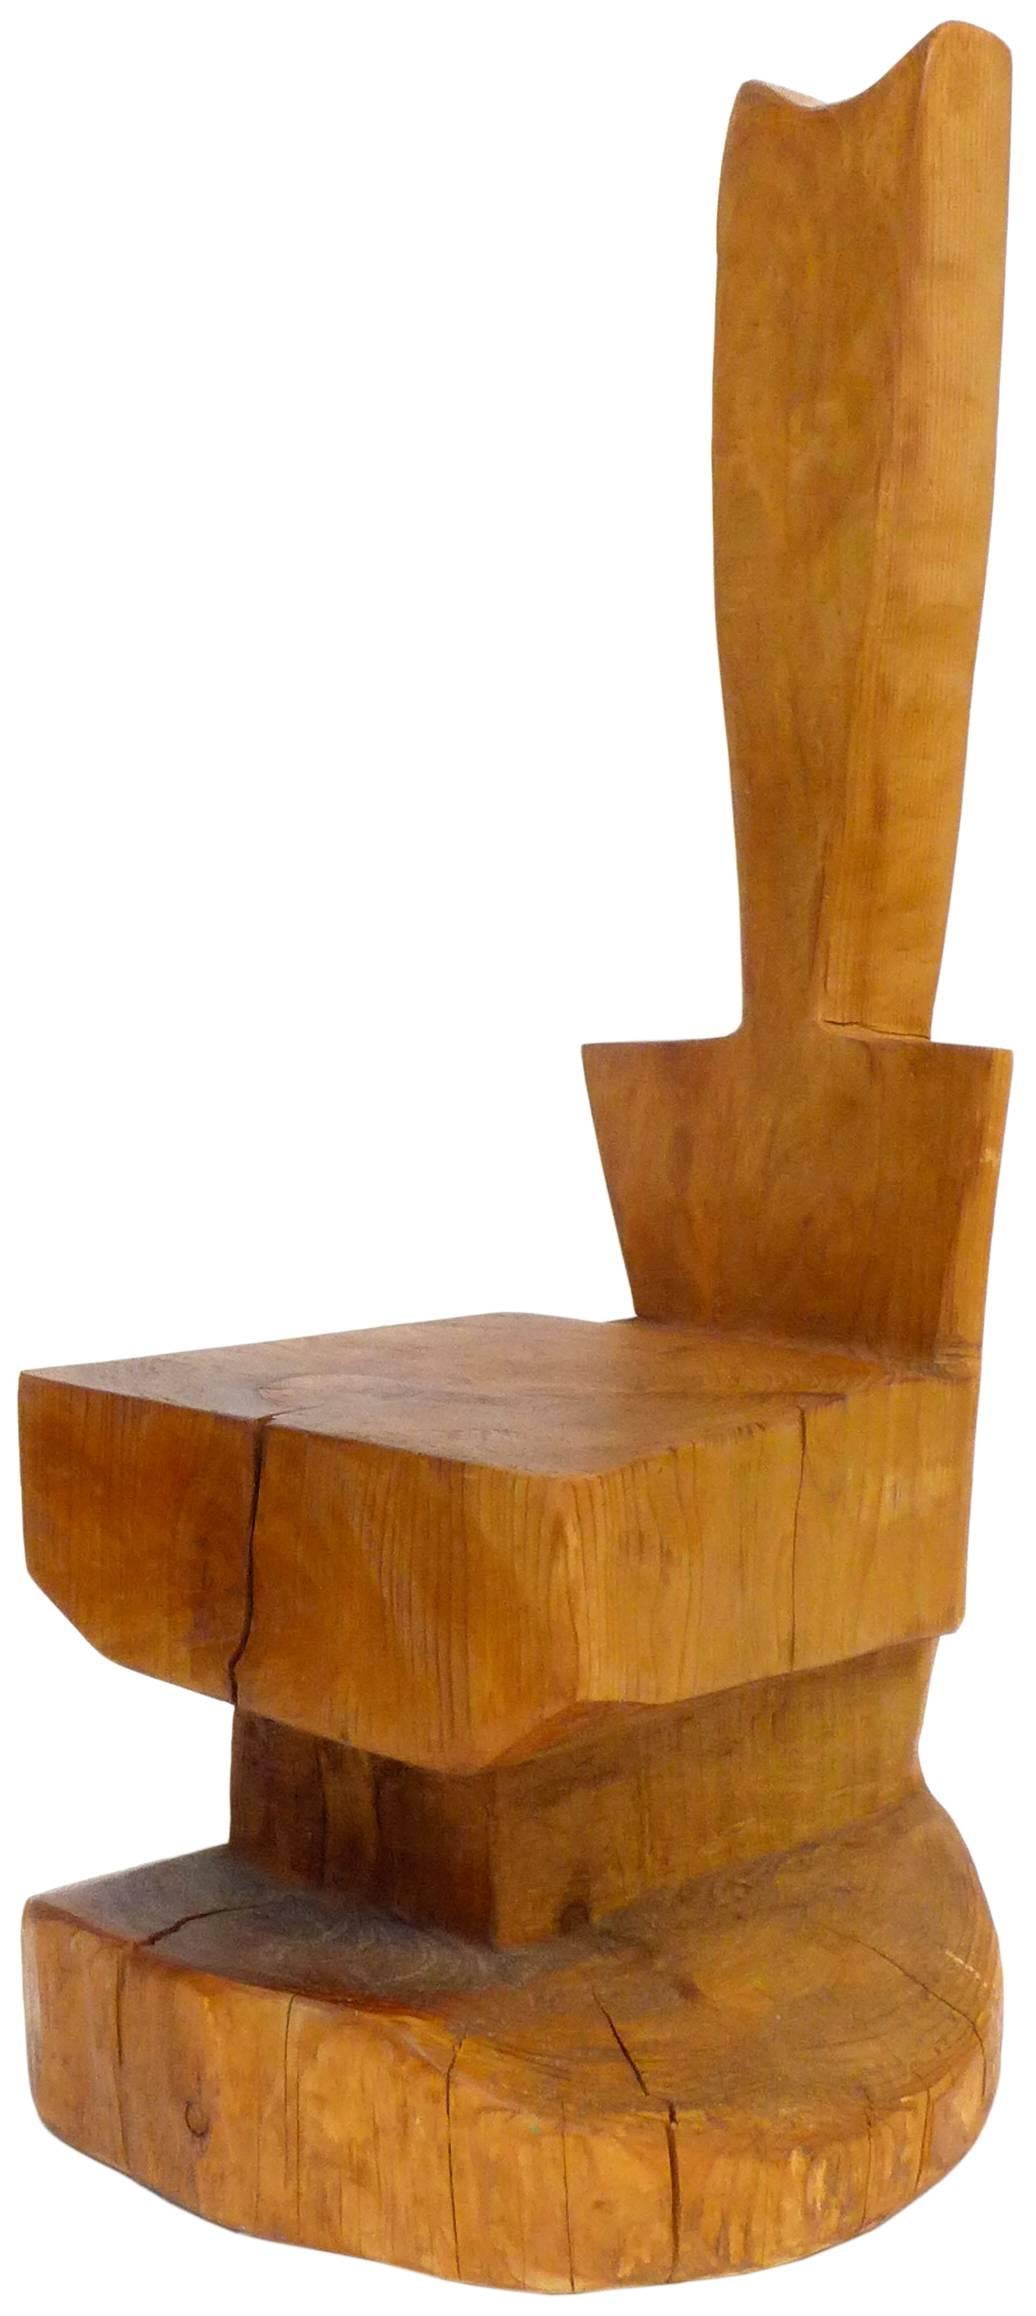 An incredible rough-sawn eucalyptus throne. Sourced from the estate of a Northern California woodworking artist, hewn from one massive hunk of wood, an impressive sculpture of a seating option, clearly primitively inspired in its coarse-modernist